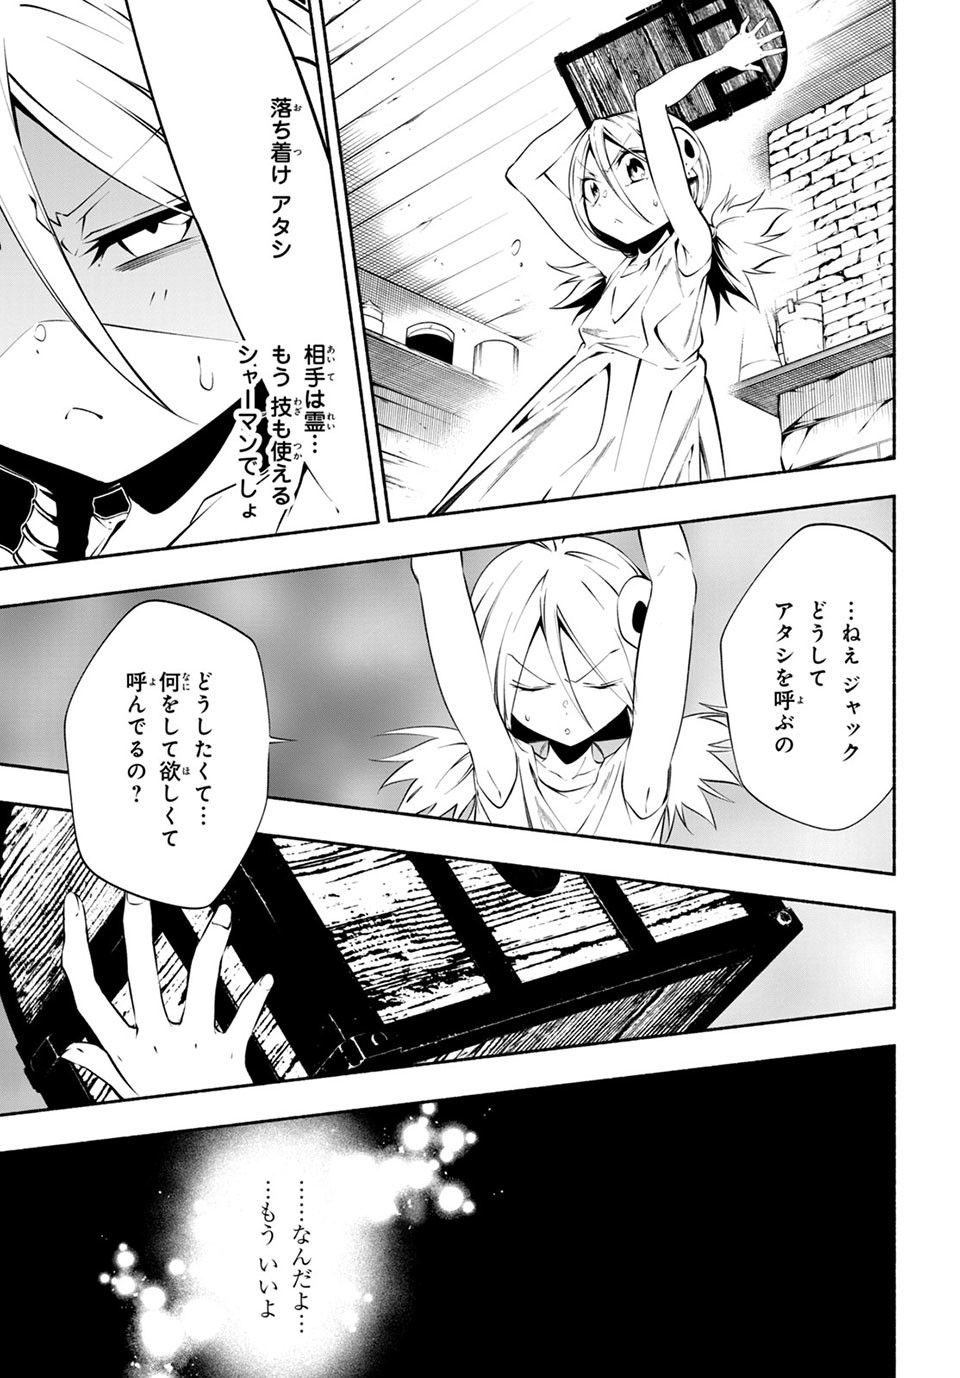 Shaman King: and a garden 第7.3話 - Page 6